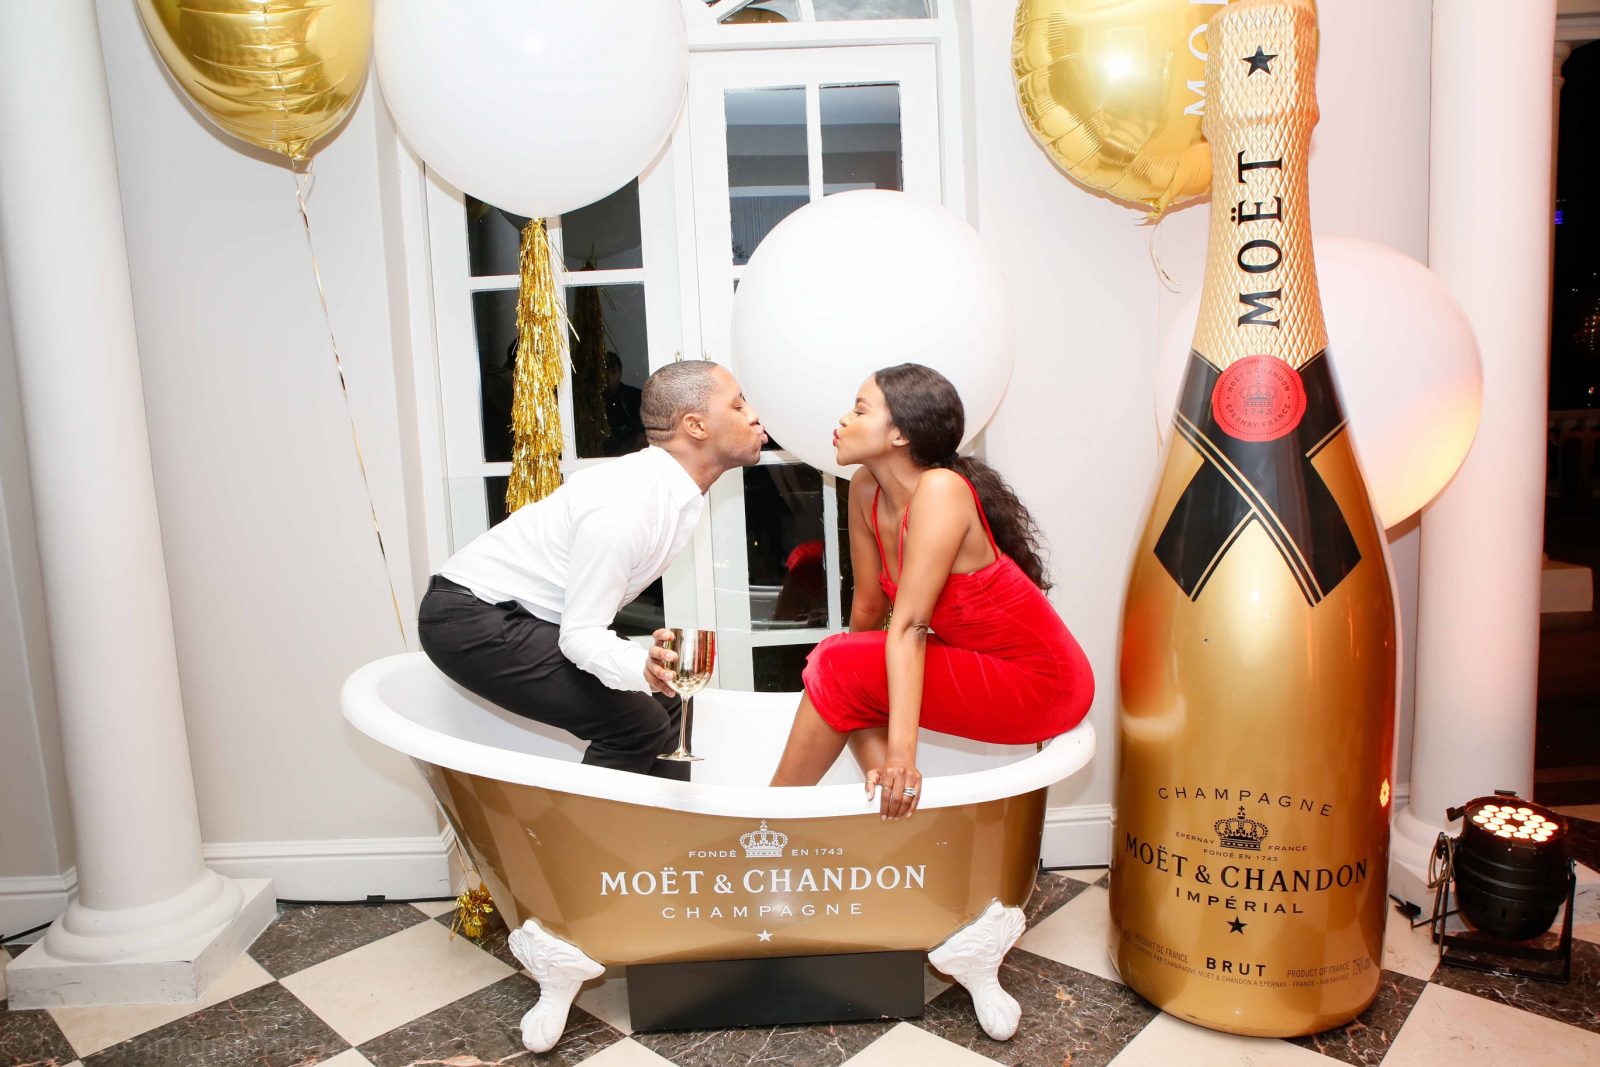 The world’s most loved champagne, Moët & Chandon, hosted a dazzling lis...